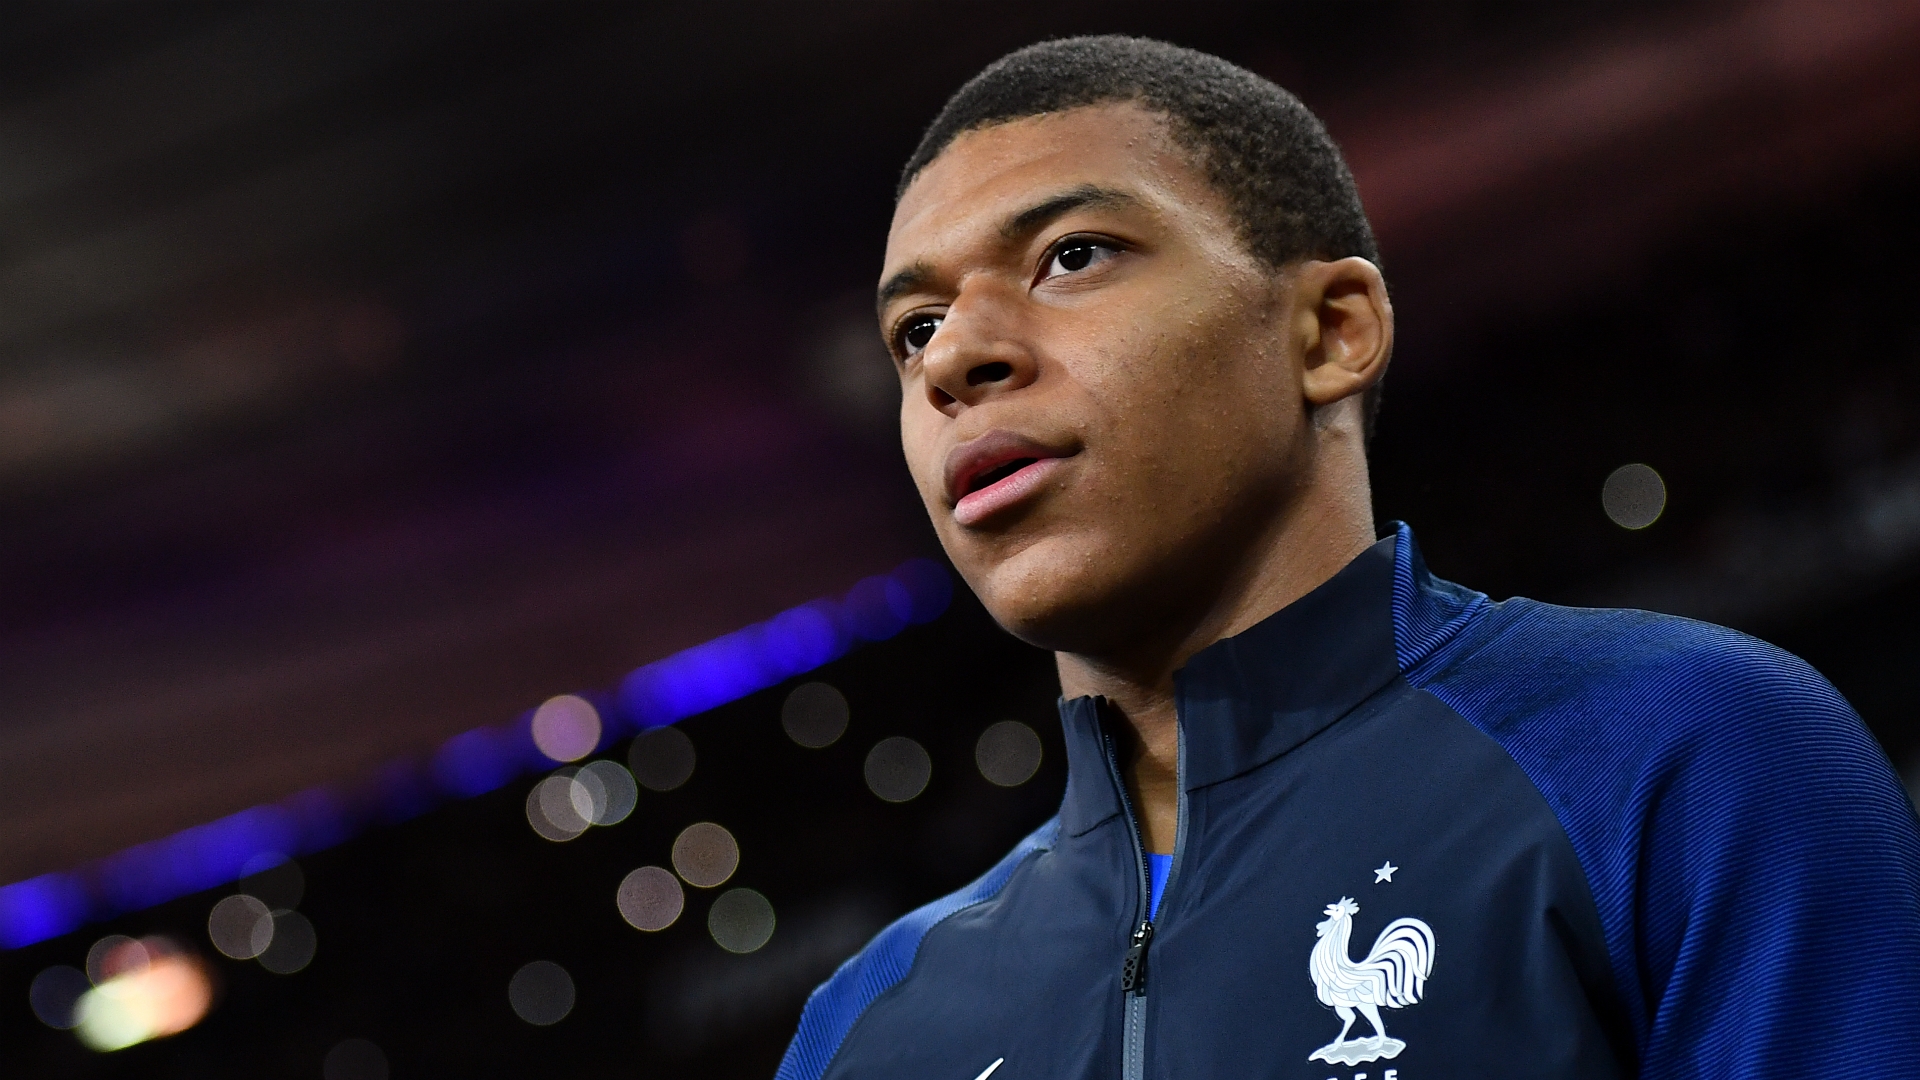 Mbappe has been heavily linked to a move to Real Madrid